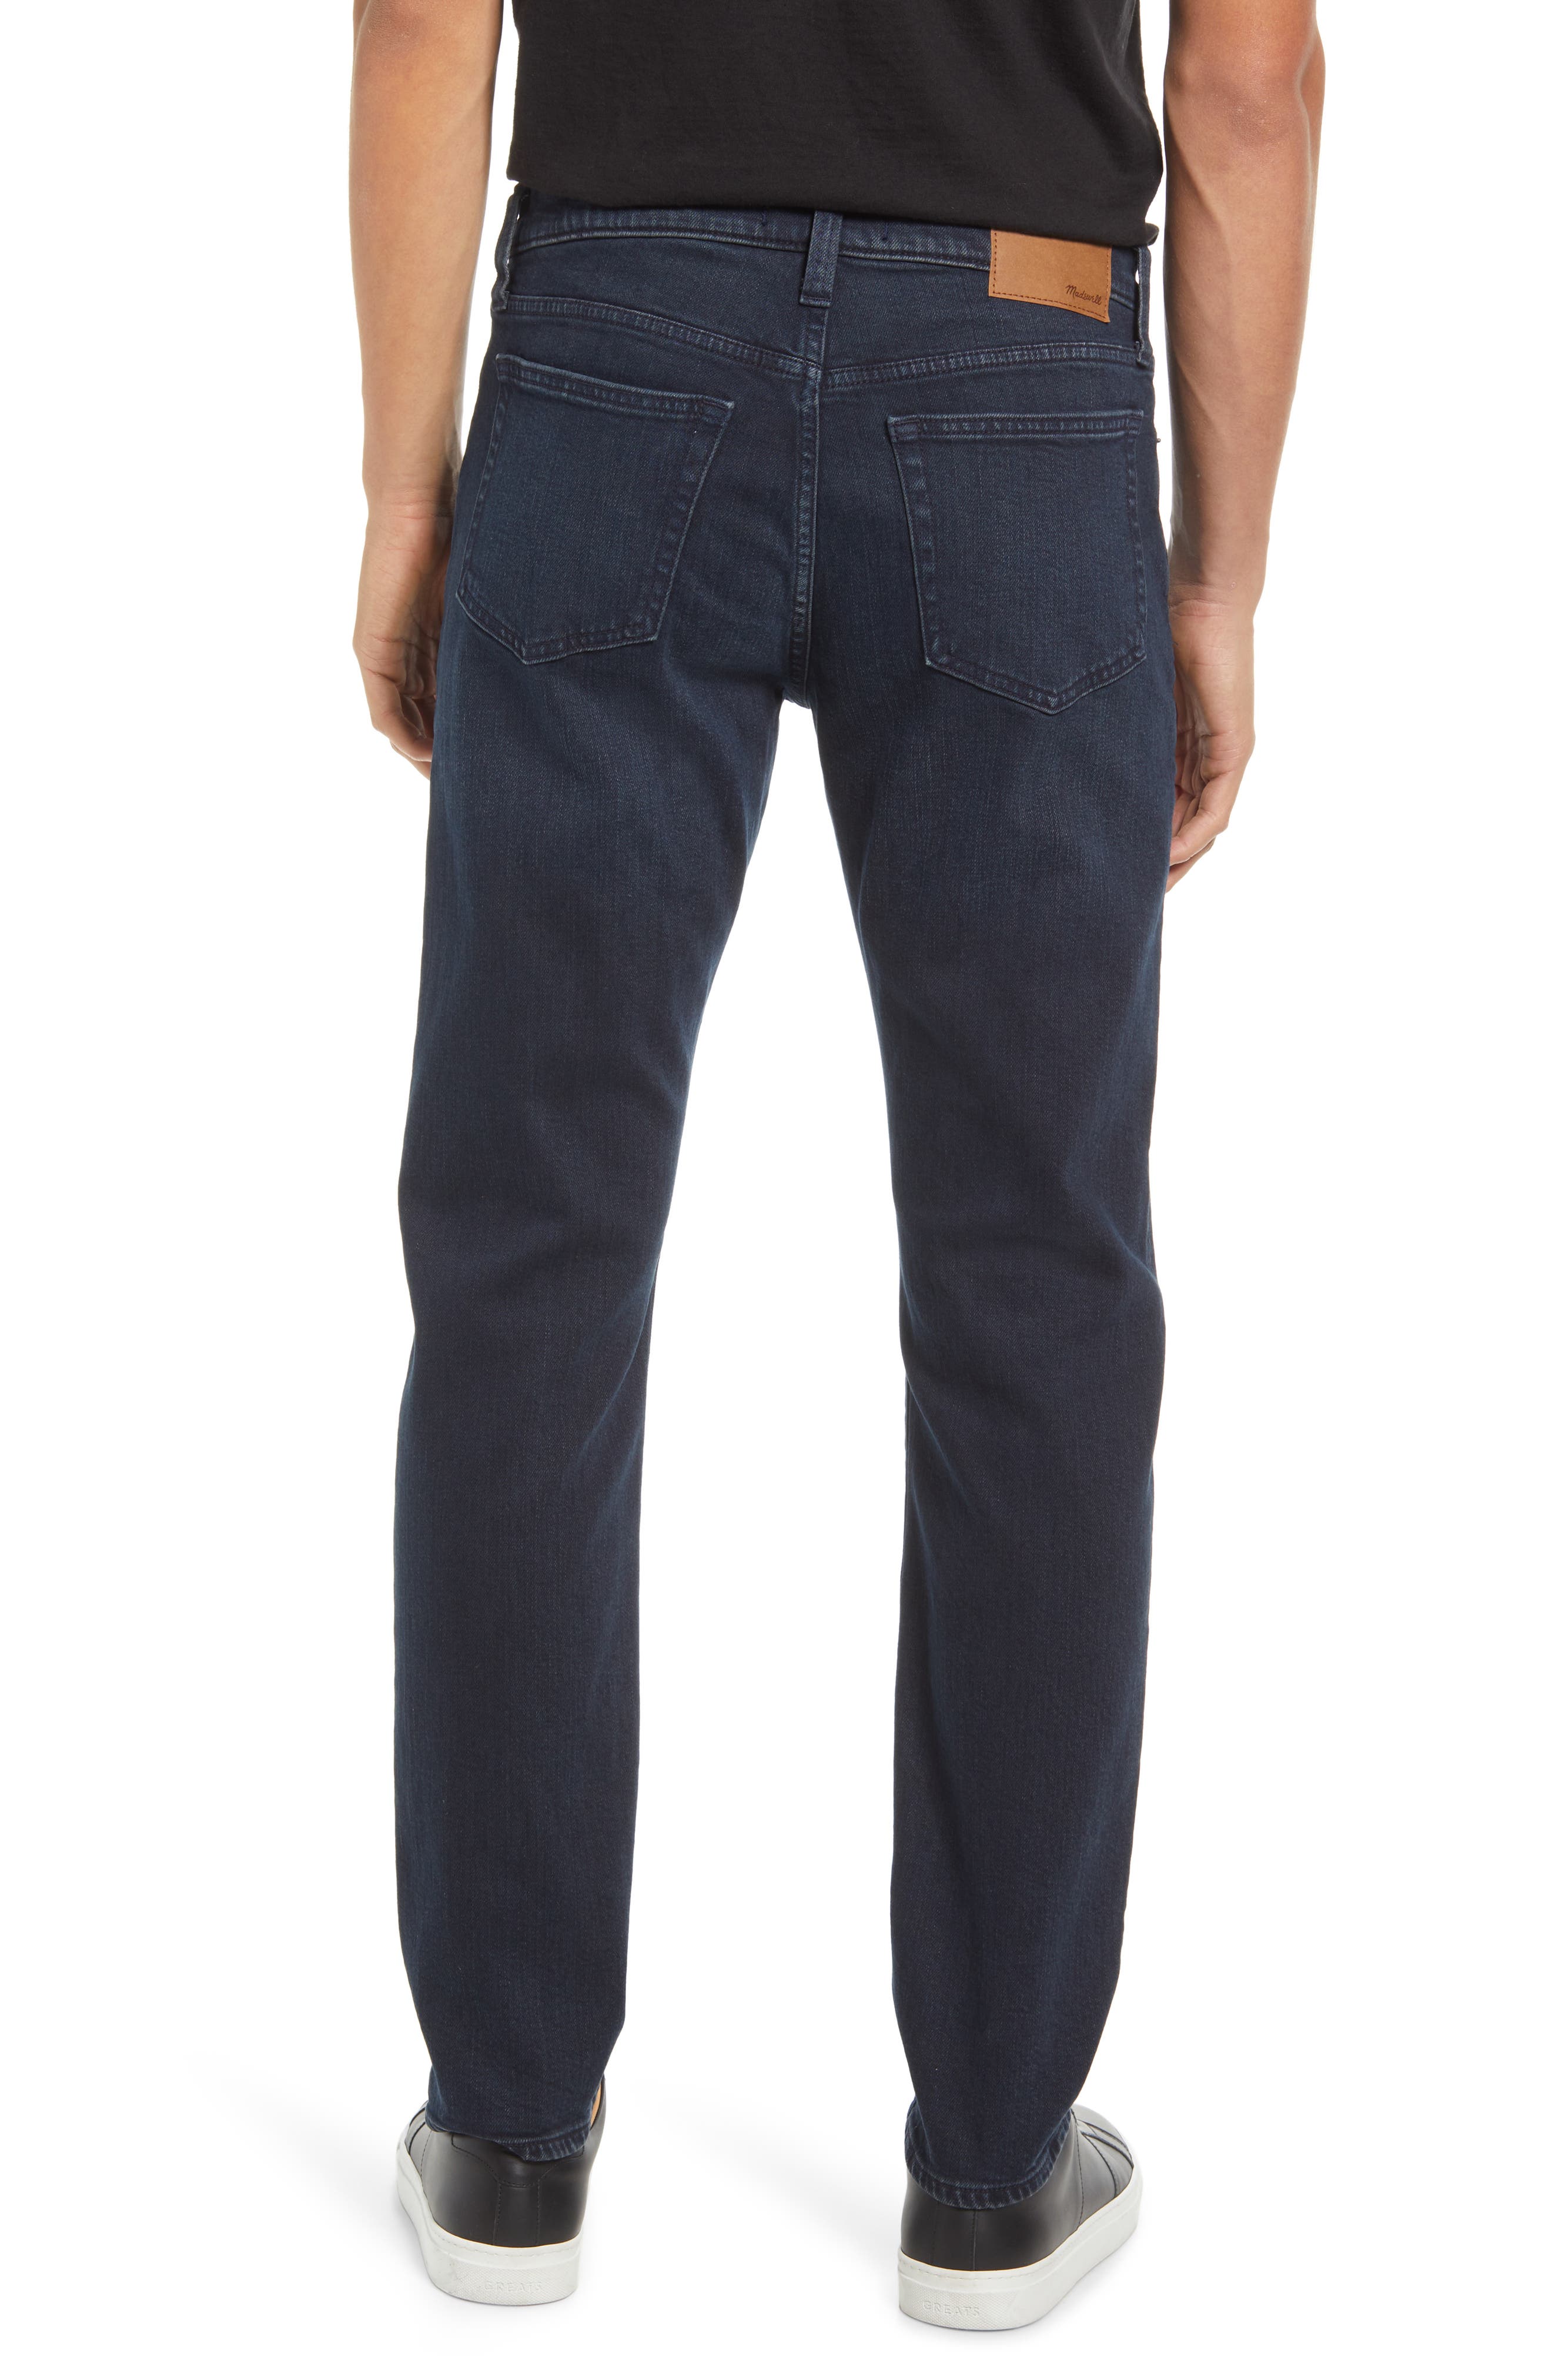 Athletic Slim Jeans in Benefield Wash